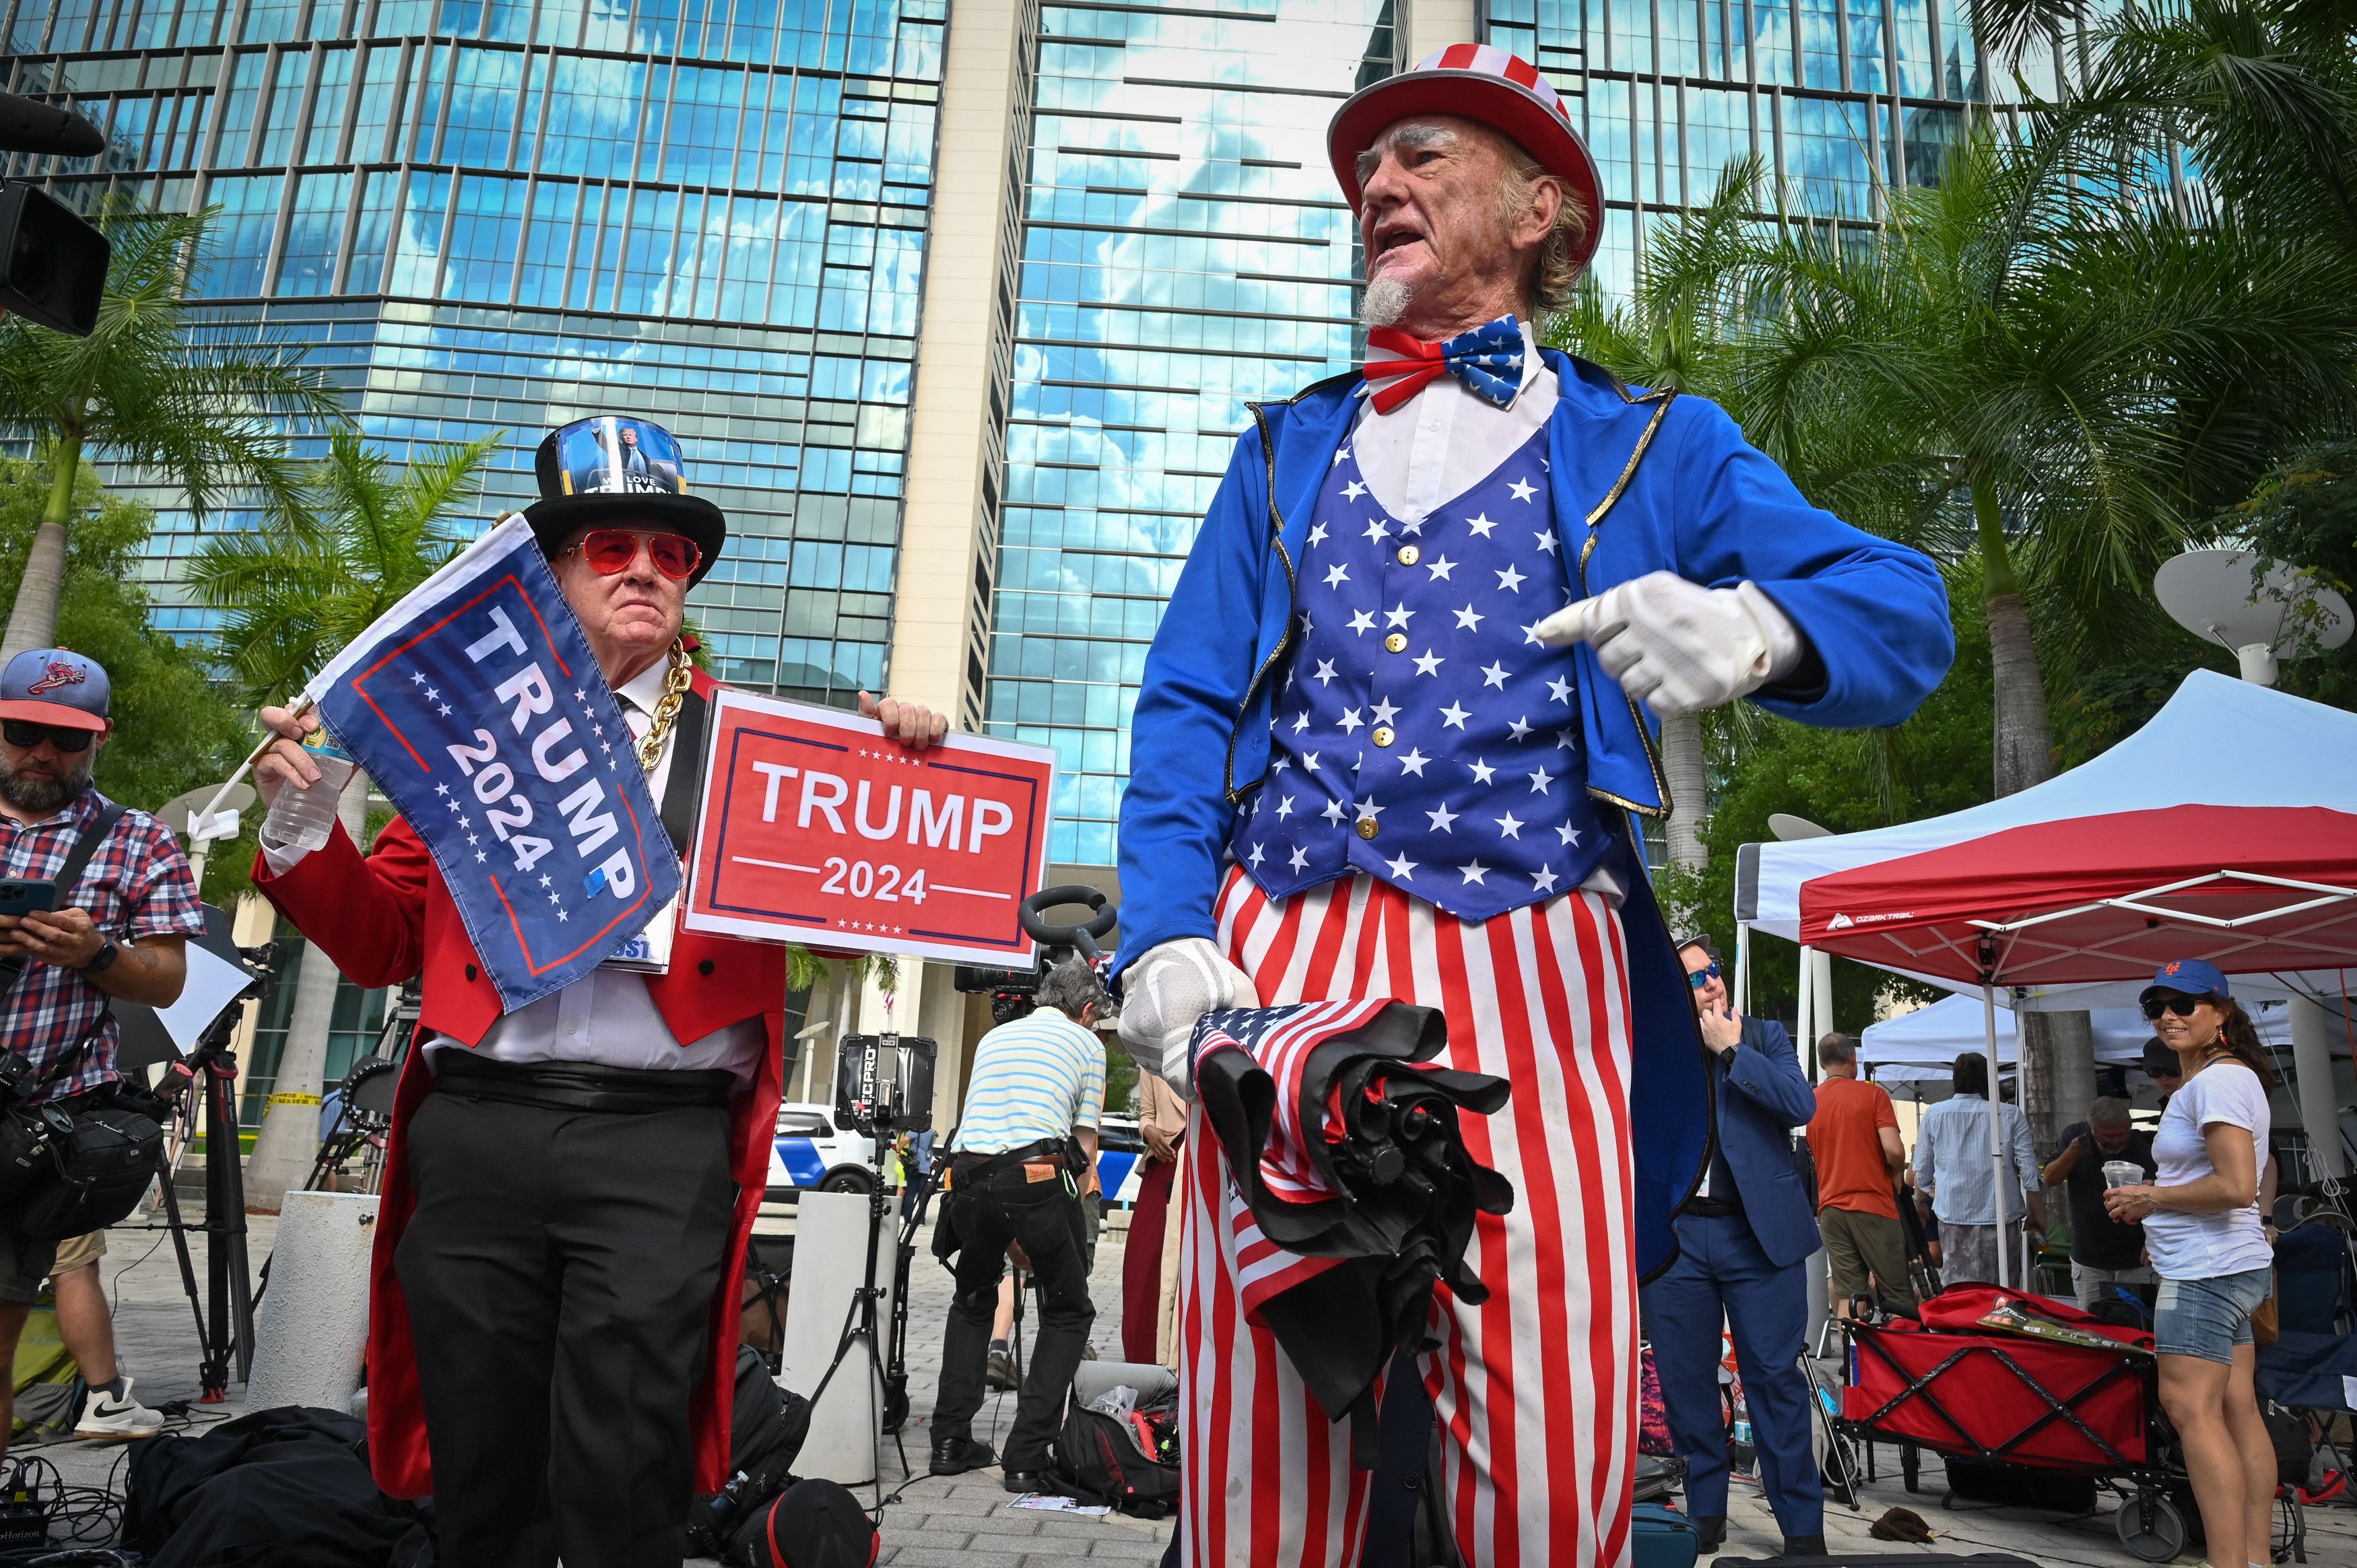 Trump supporters show their support in front of the Wilkie D. Ferguson Jr. United States Courthouse before the arraignment of former President Donald Trump in Miami, Florida on June 13, 2023